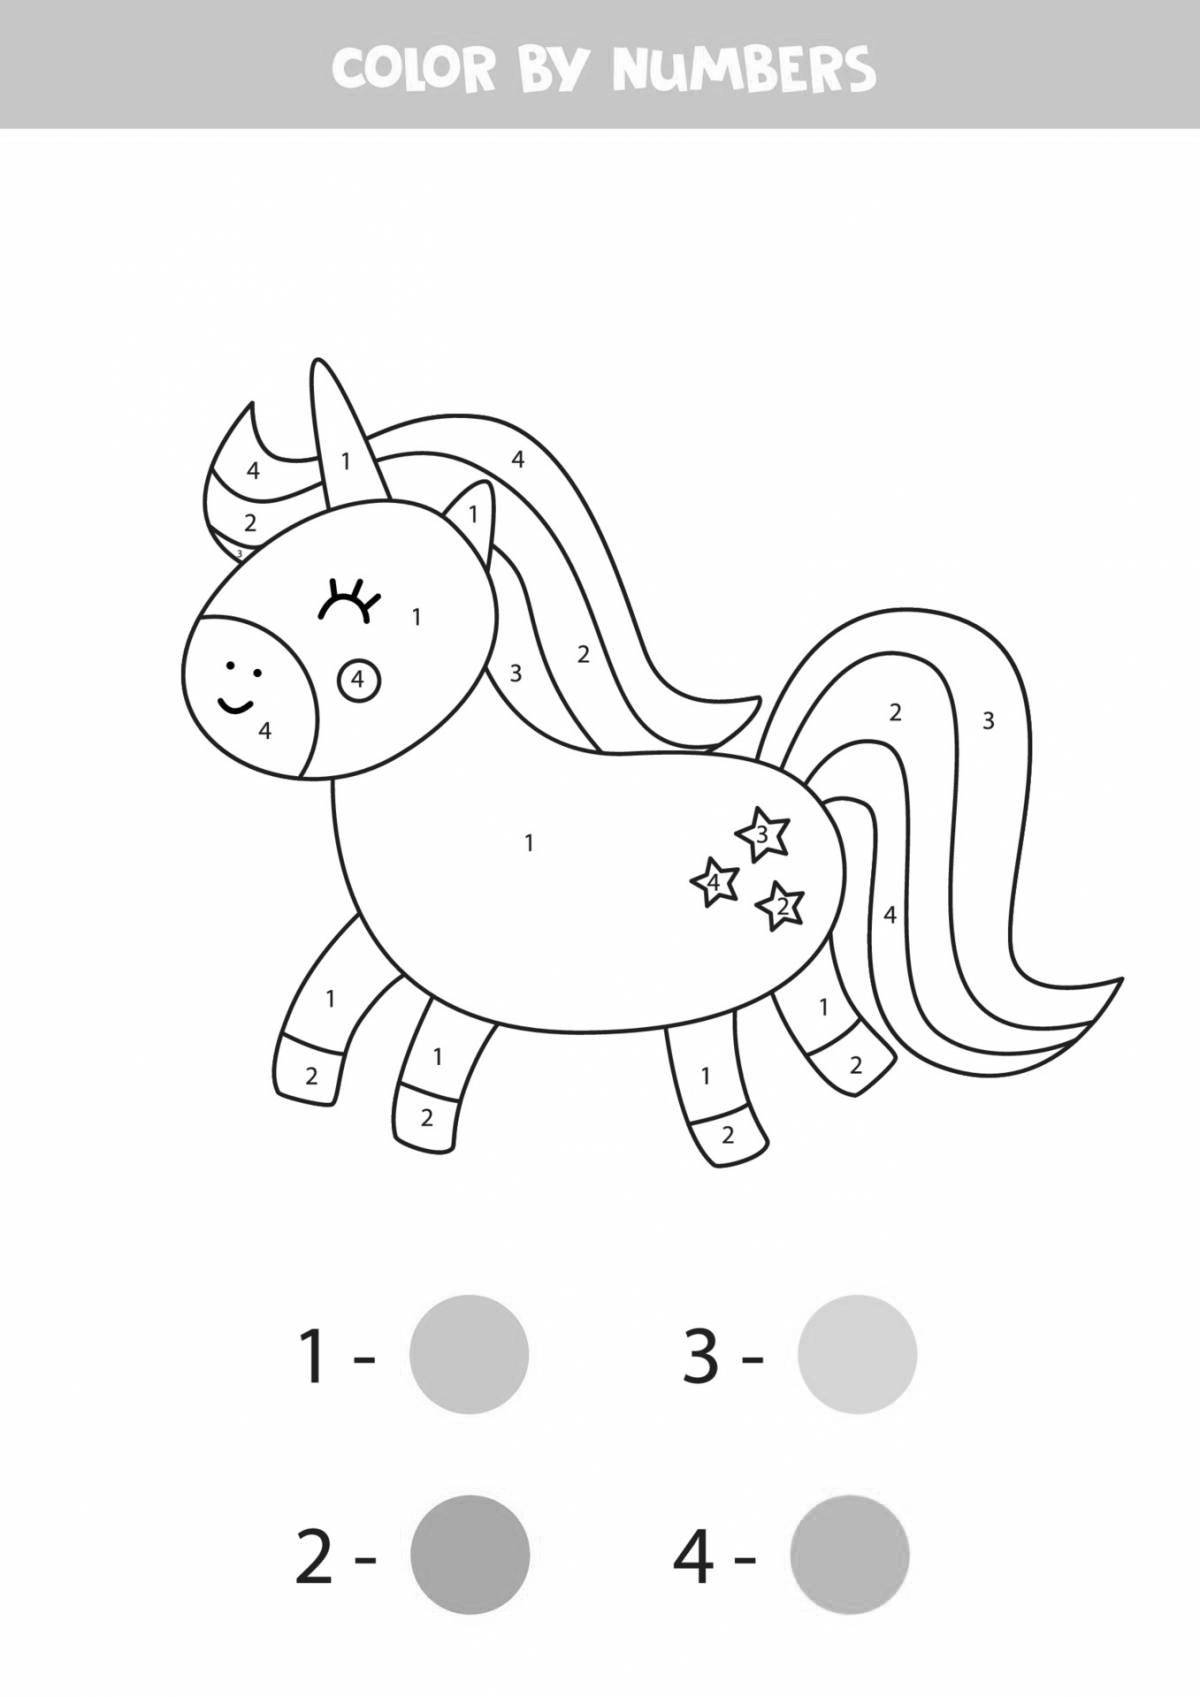 Exquisite unicorn coloring by numbers for kids